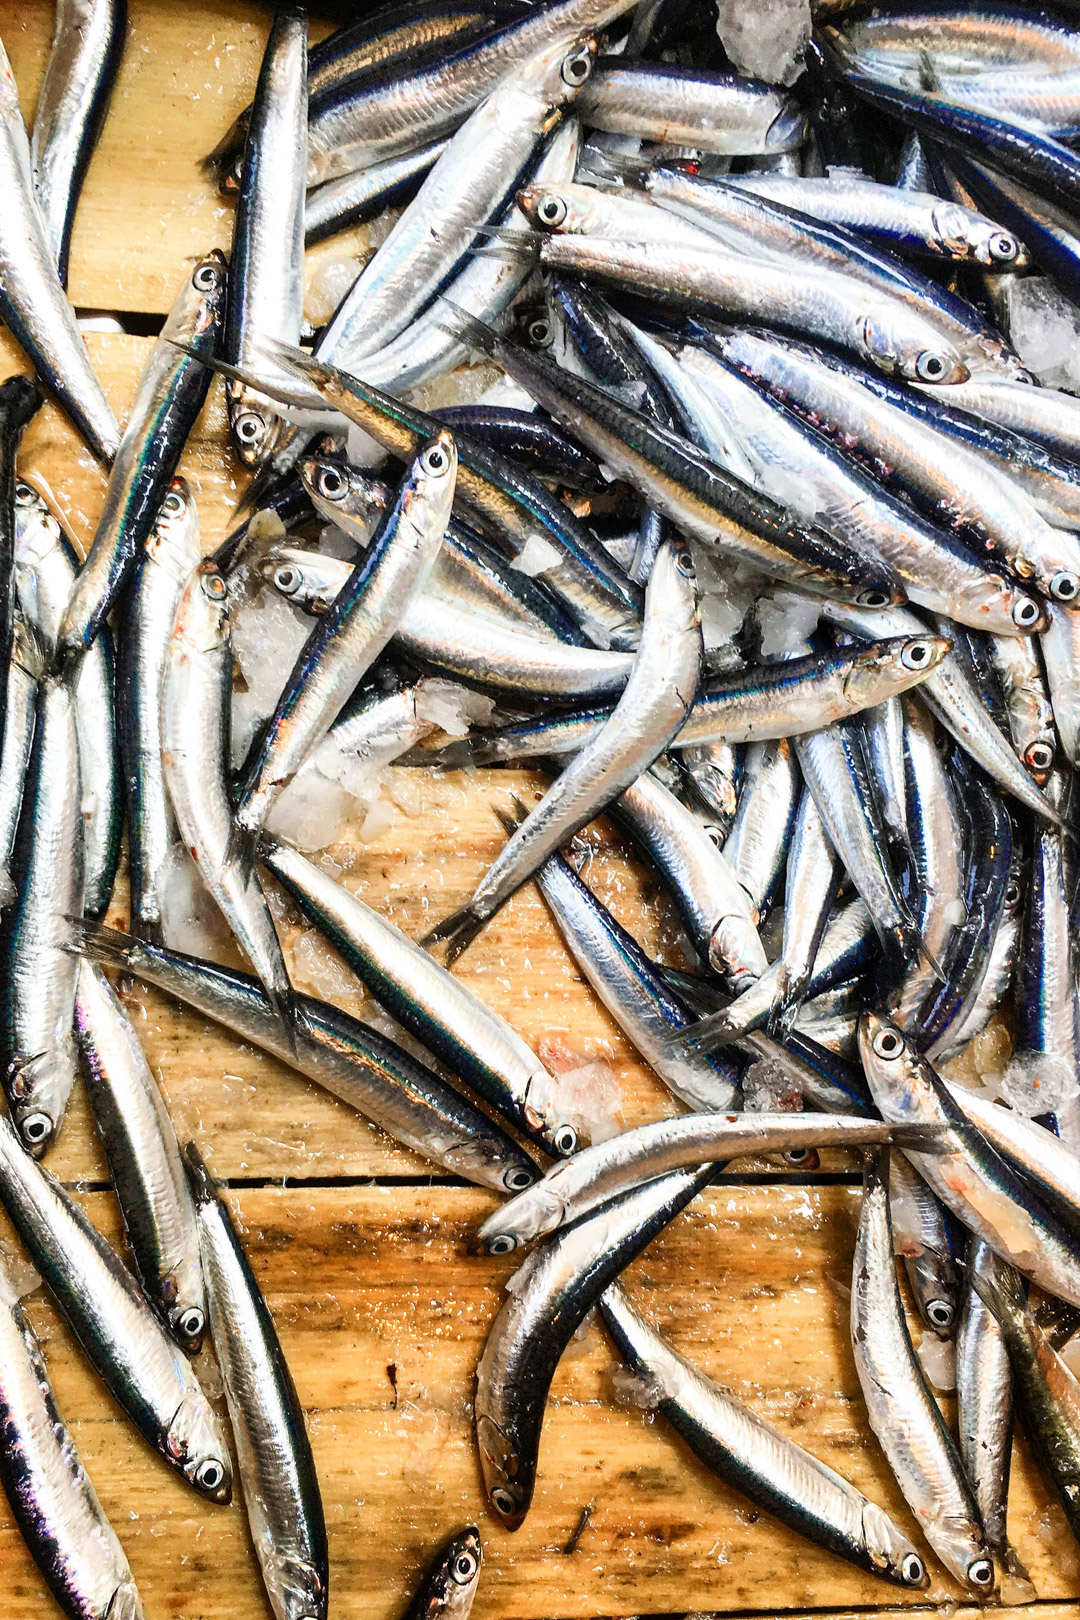 My collection of recipes with anchovies